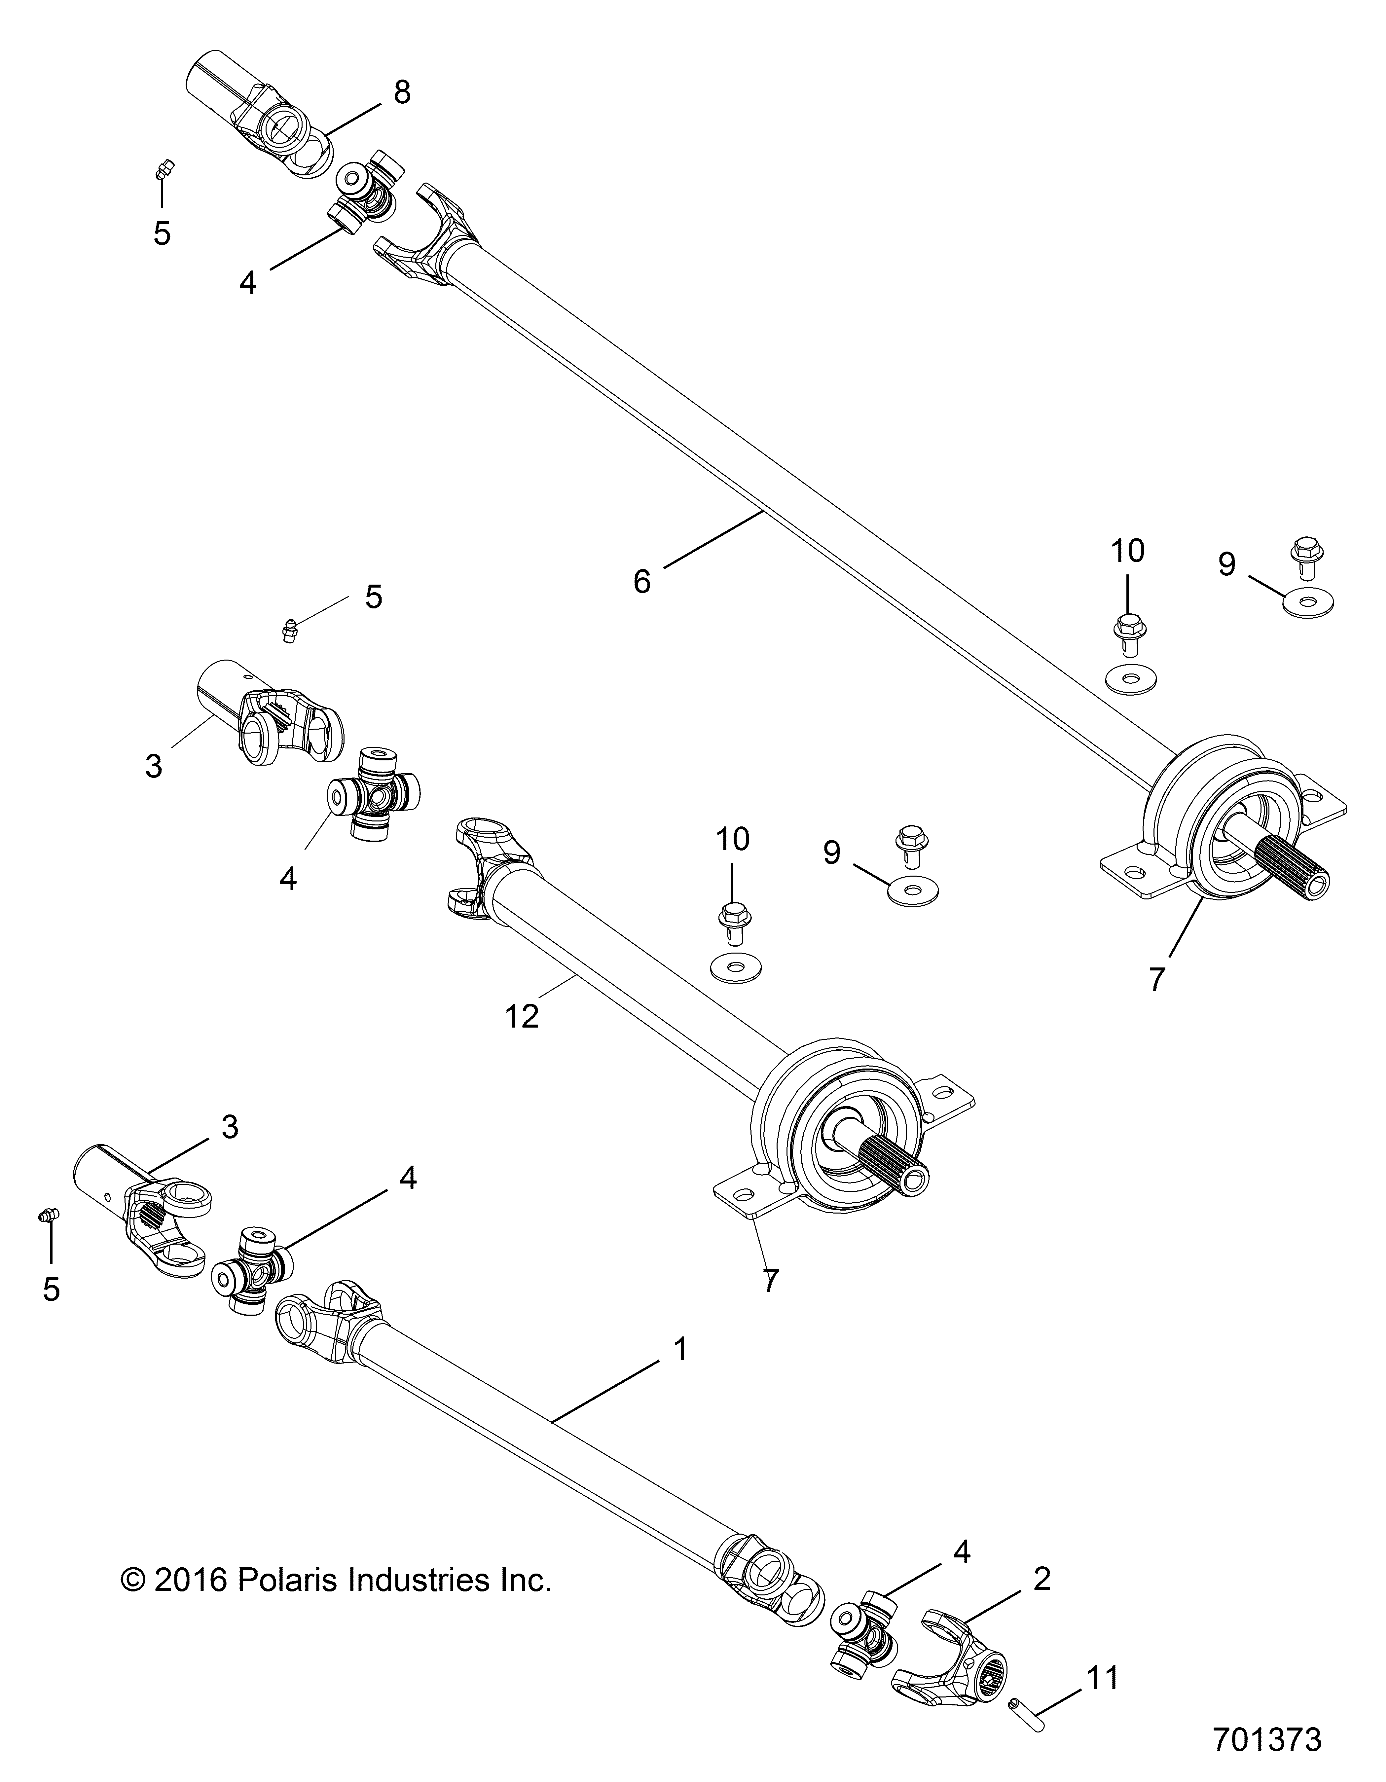 Part Number : 1333669 PROPSHAFT ASSEMBLY  MID